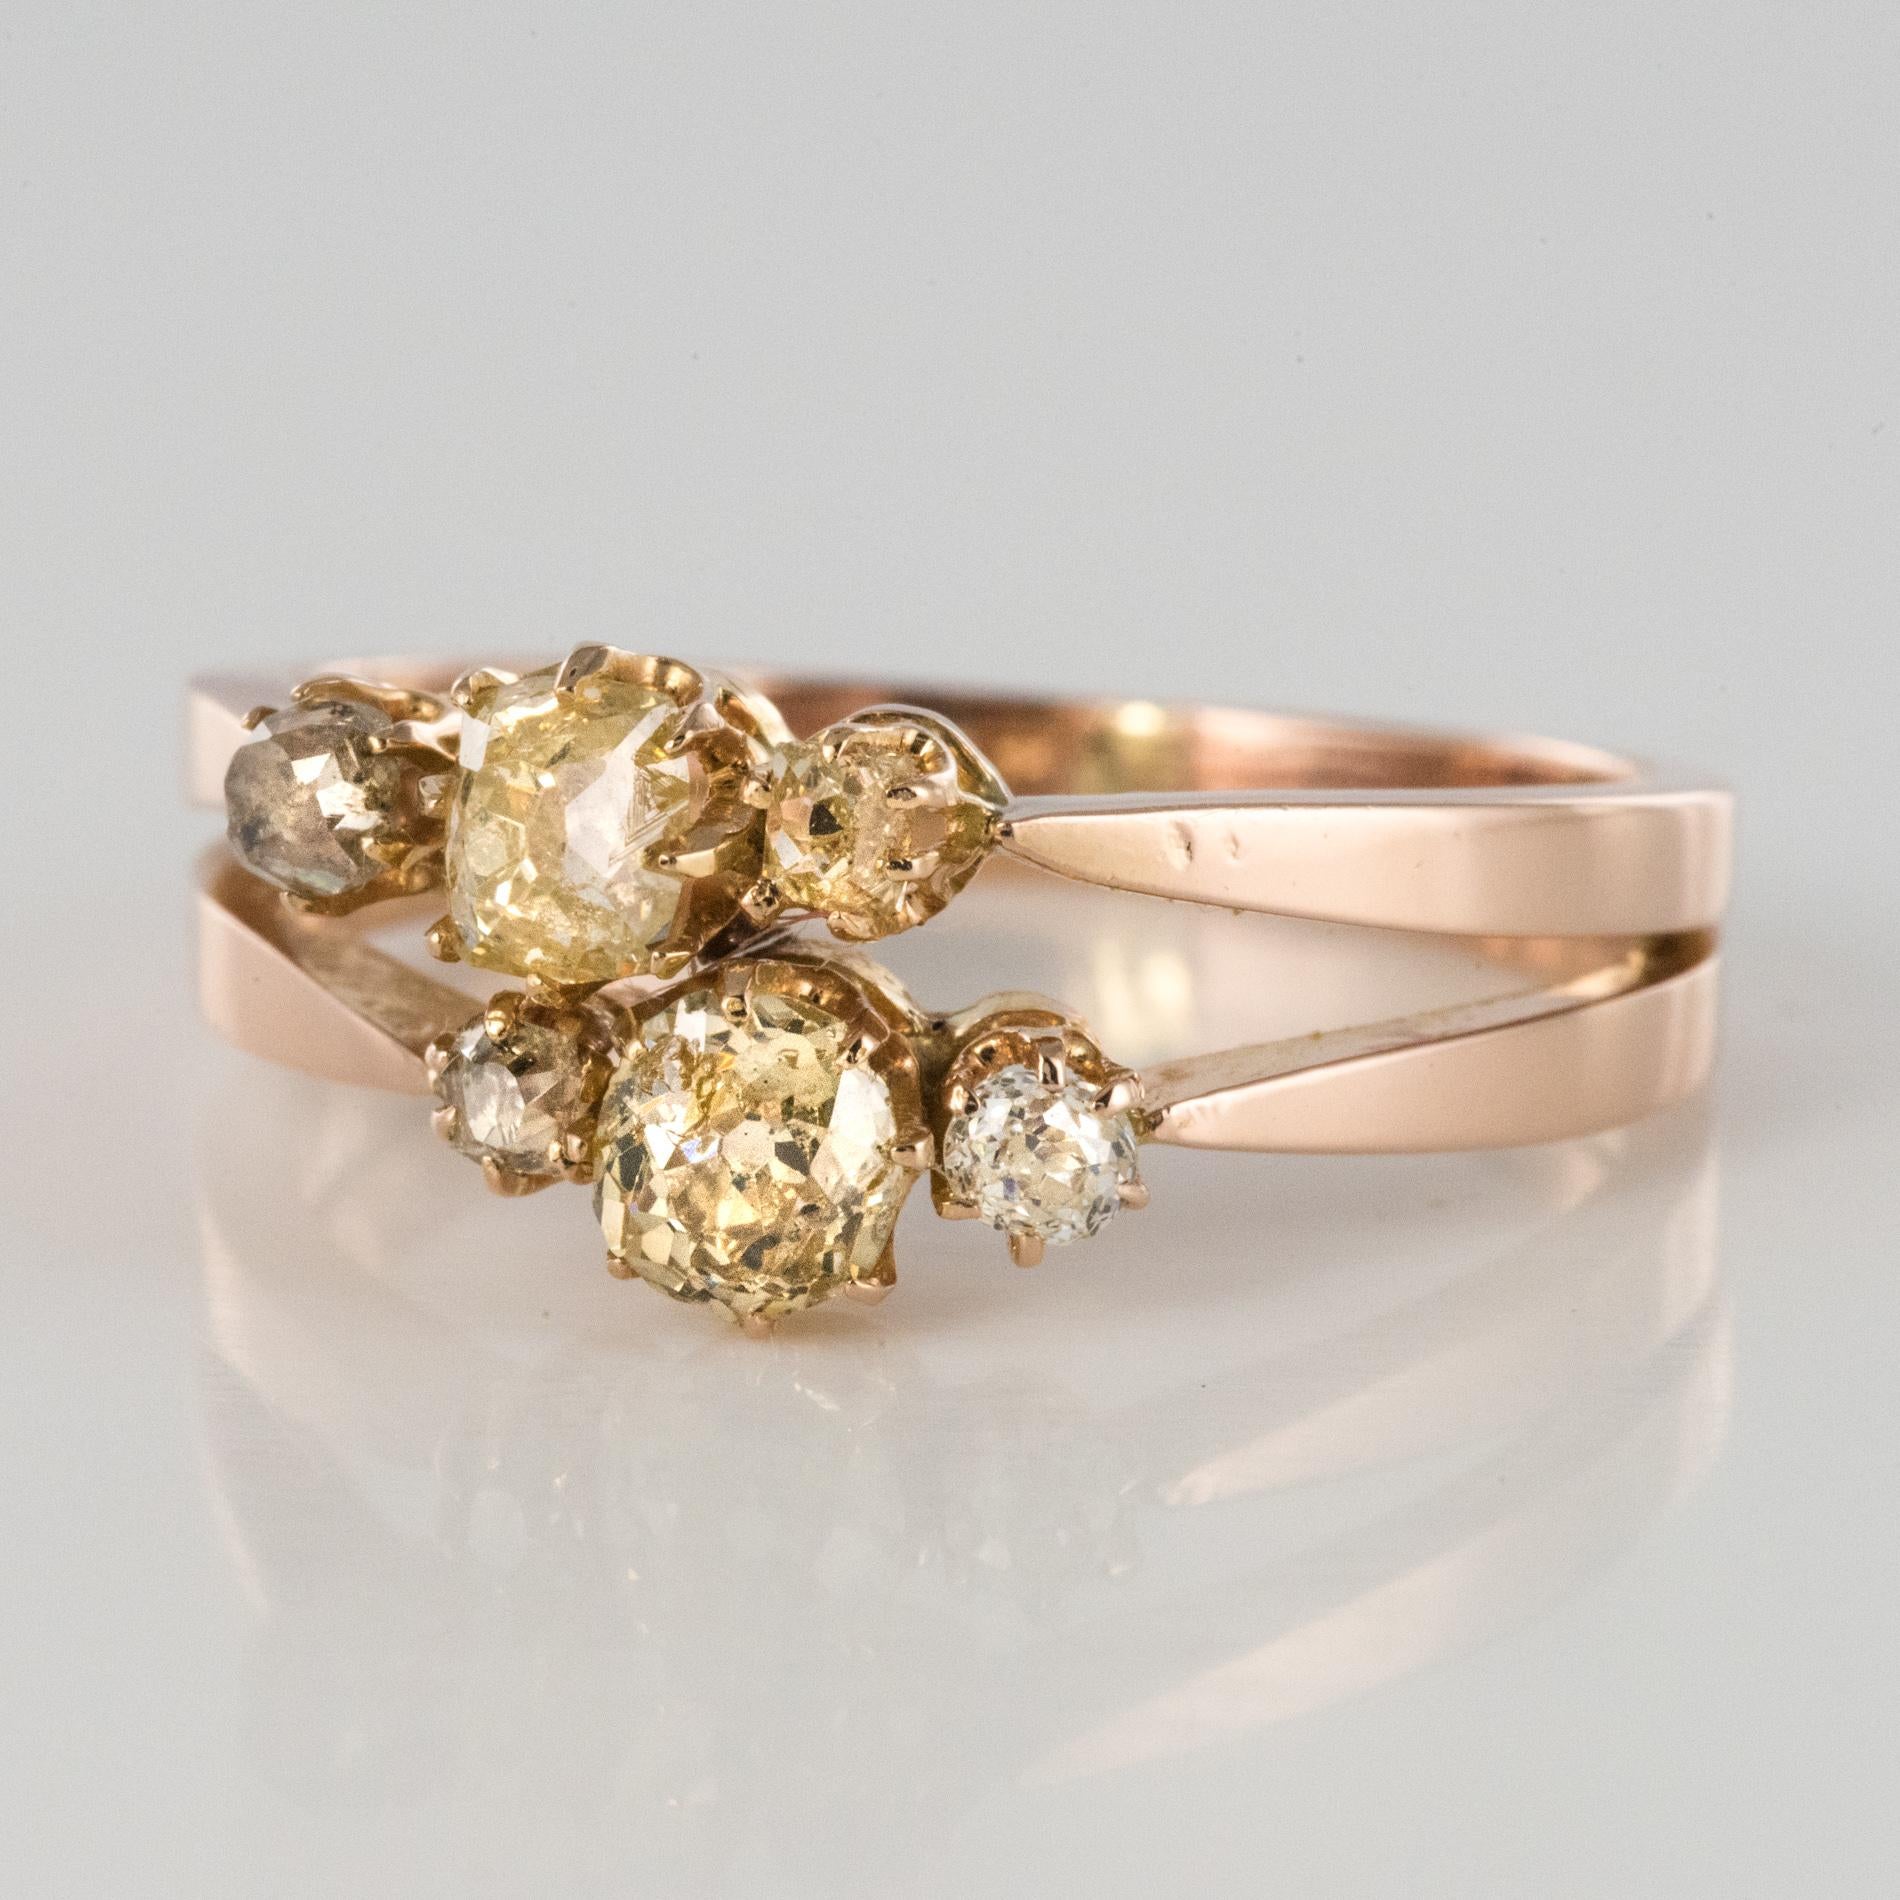 Napoleon III 19th Century Champagne and Yellow Diamond 18 Karat Rose Gold You and Me Ring